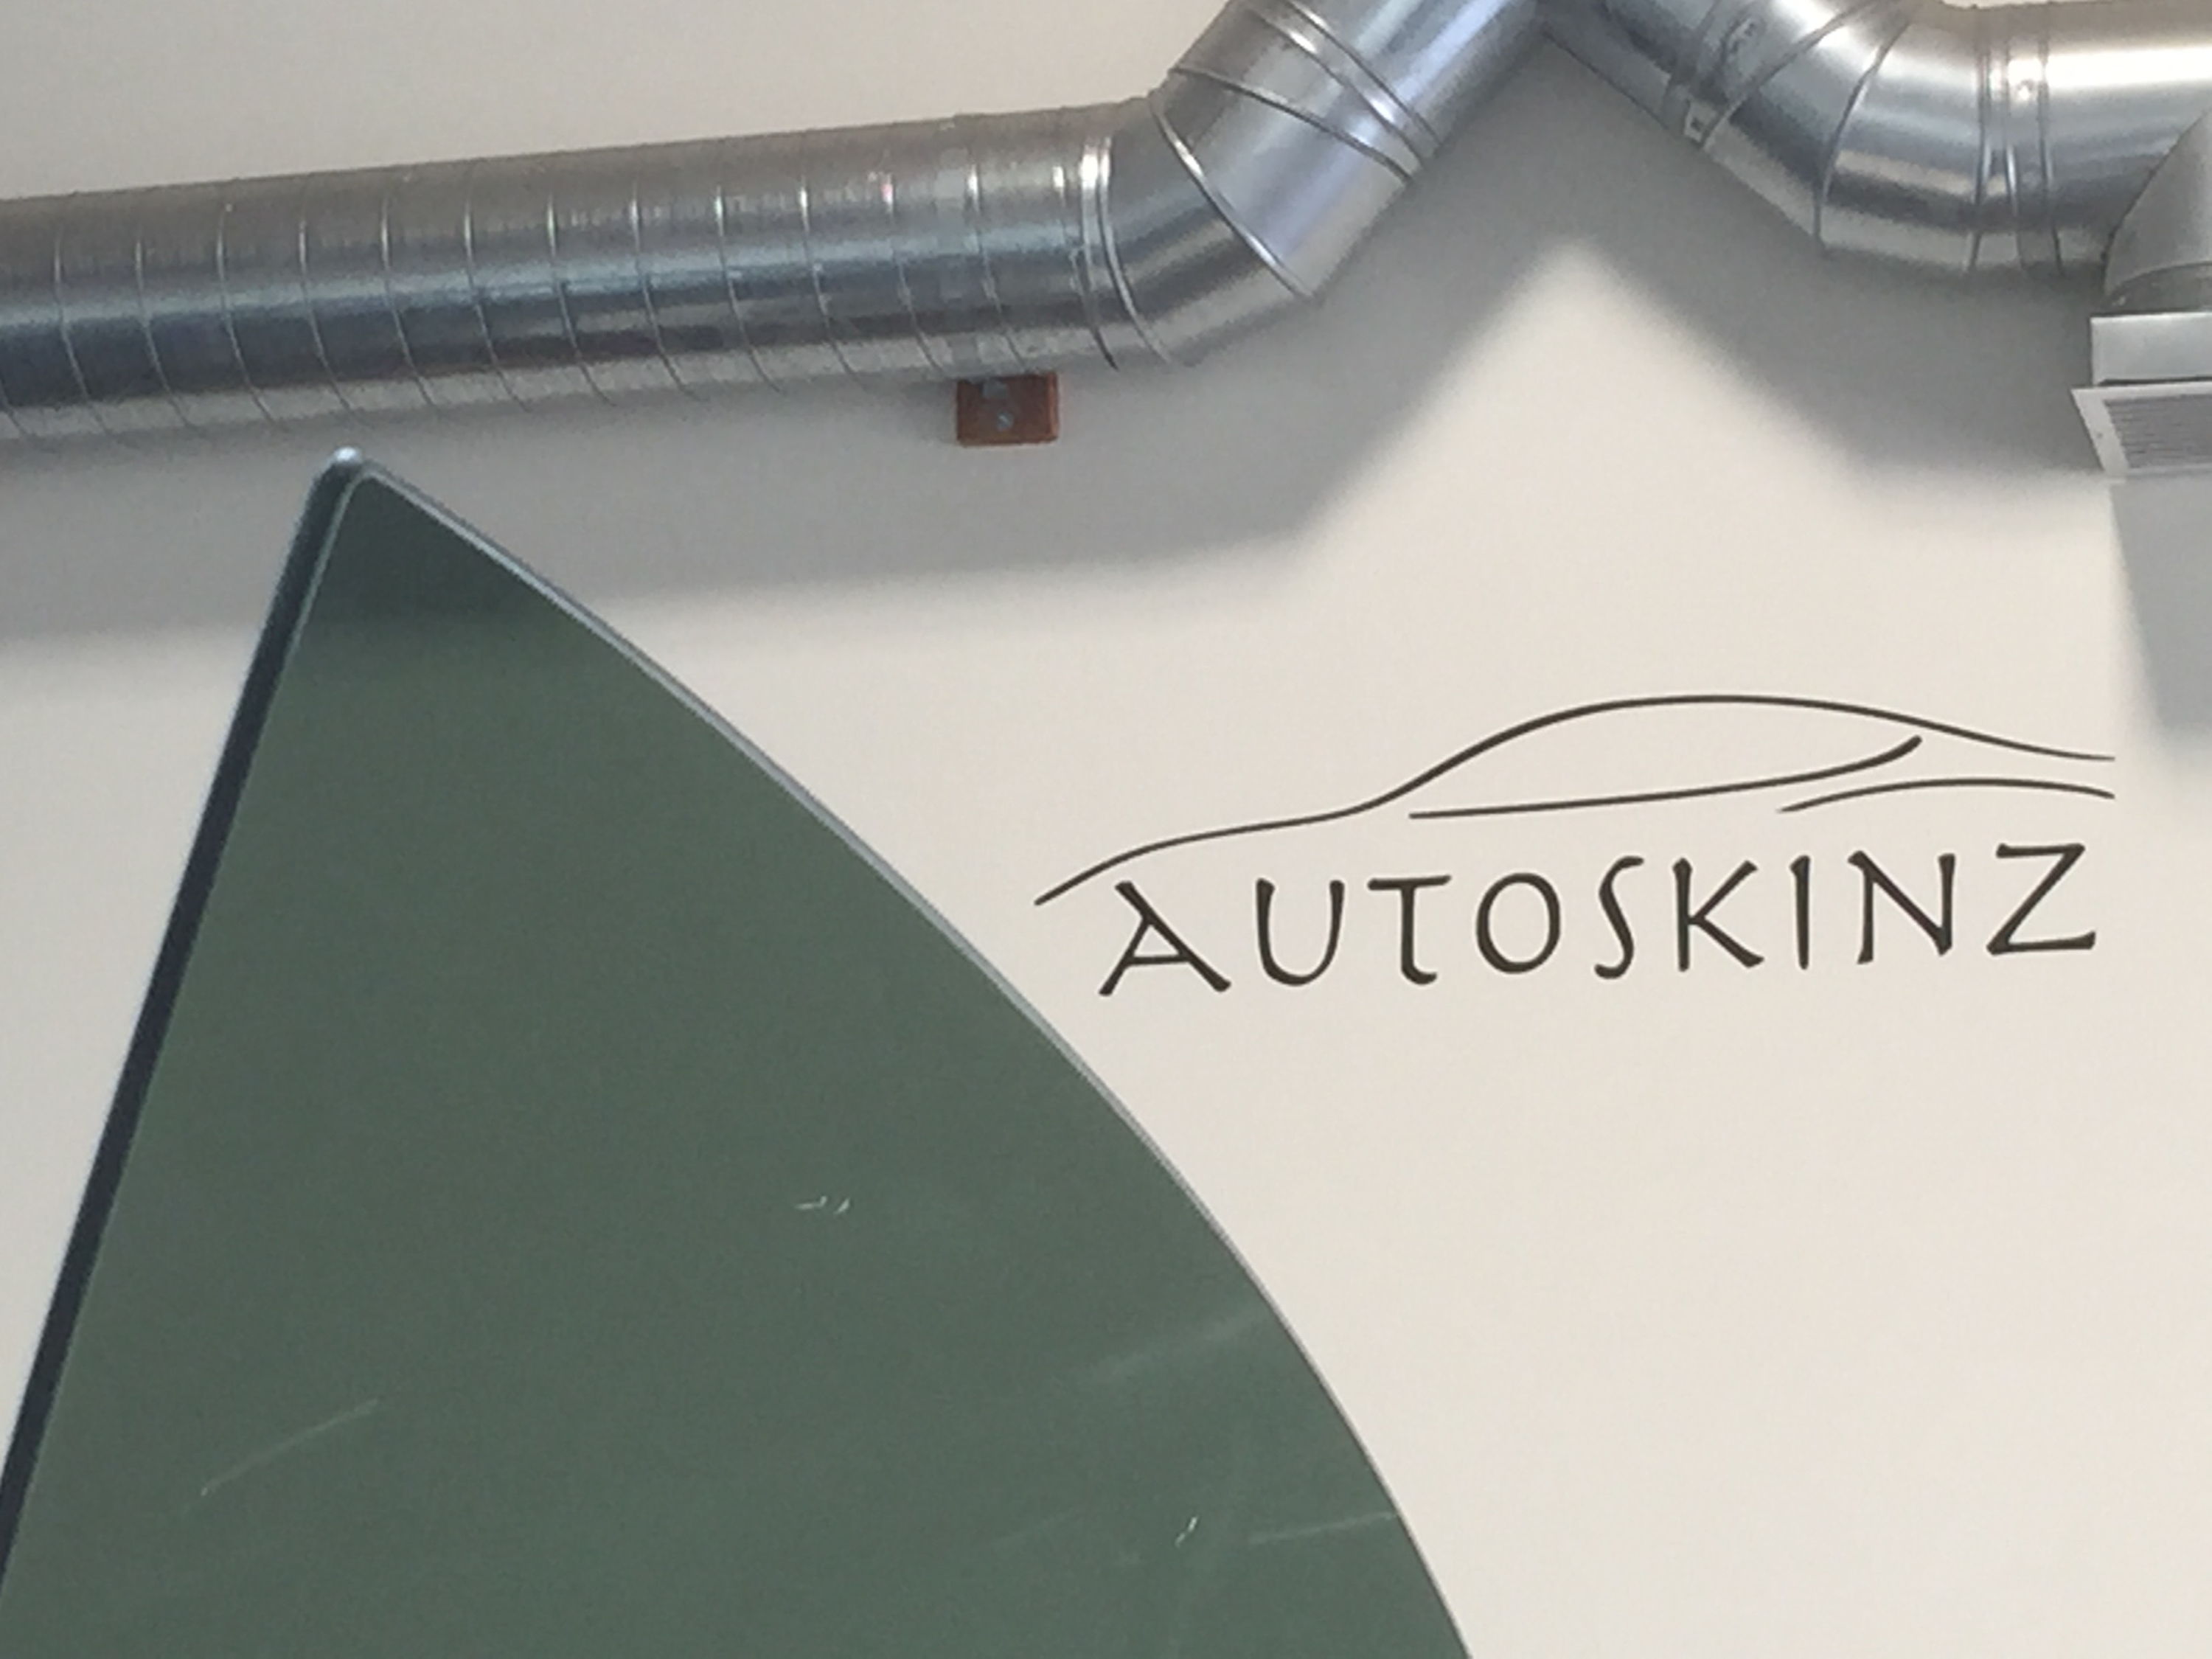 3M Crystalline with shaved edges for a factory feel and look | Autoskinz